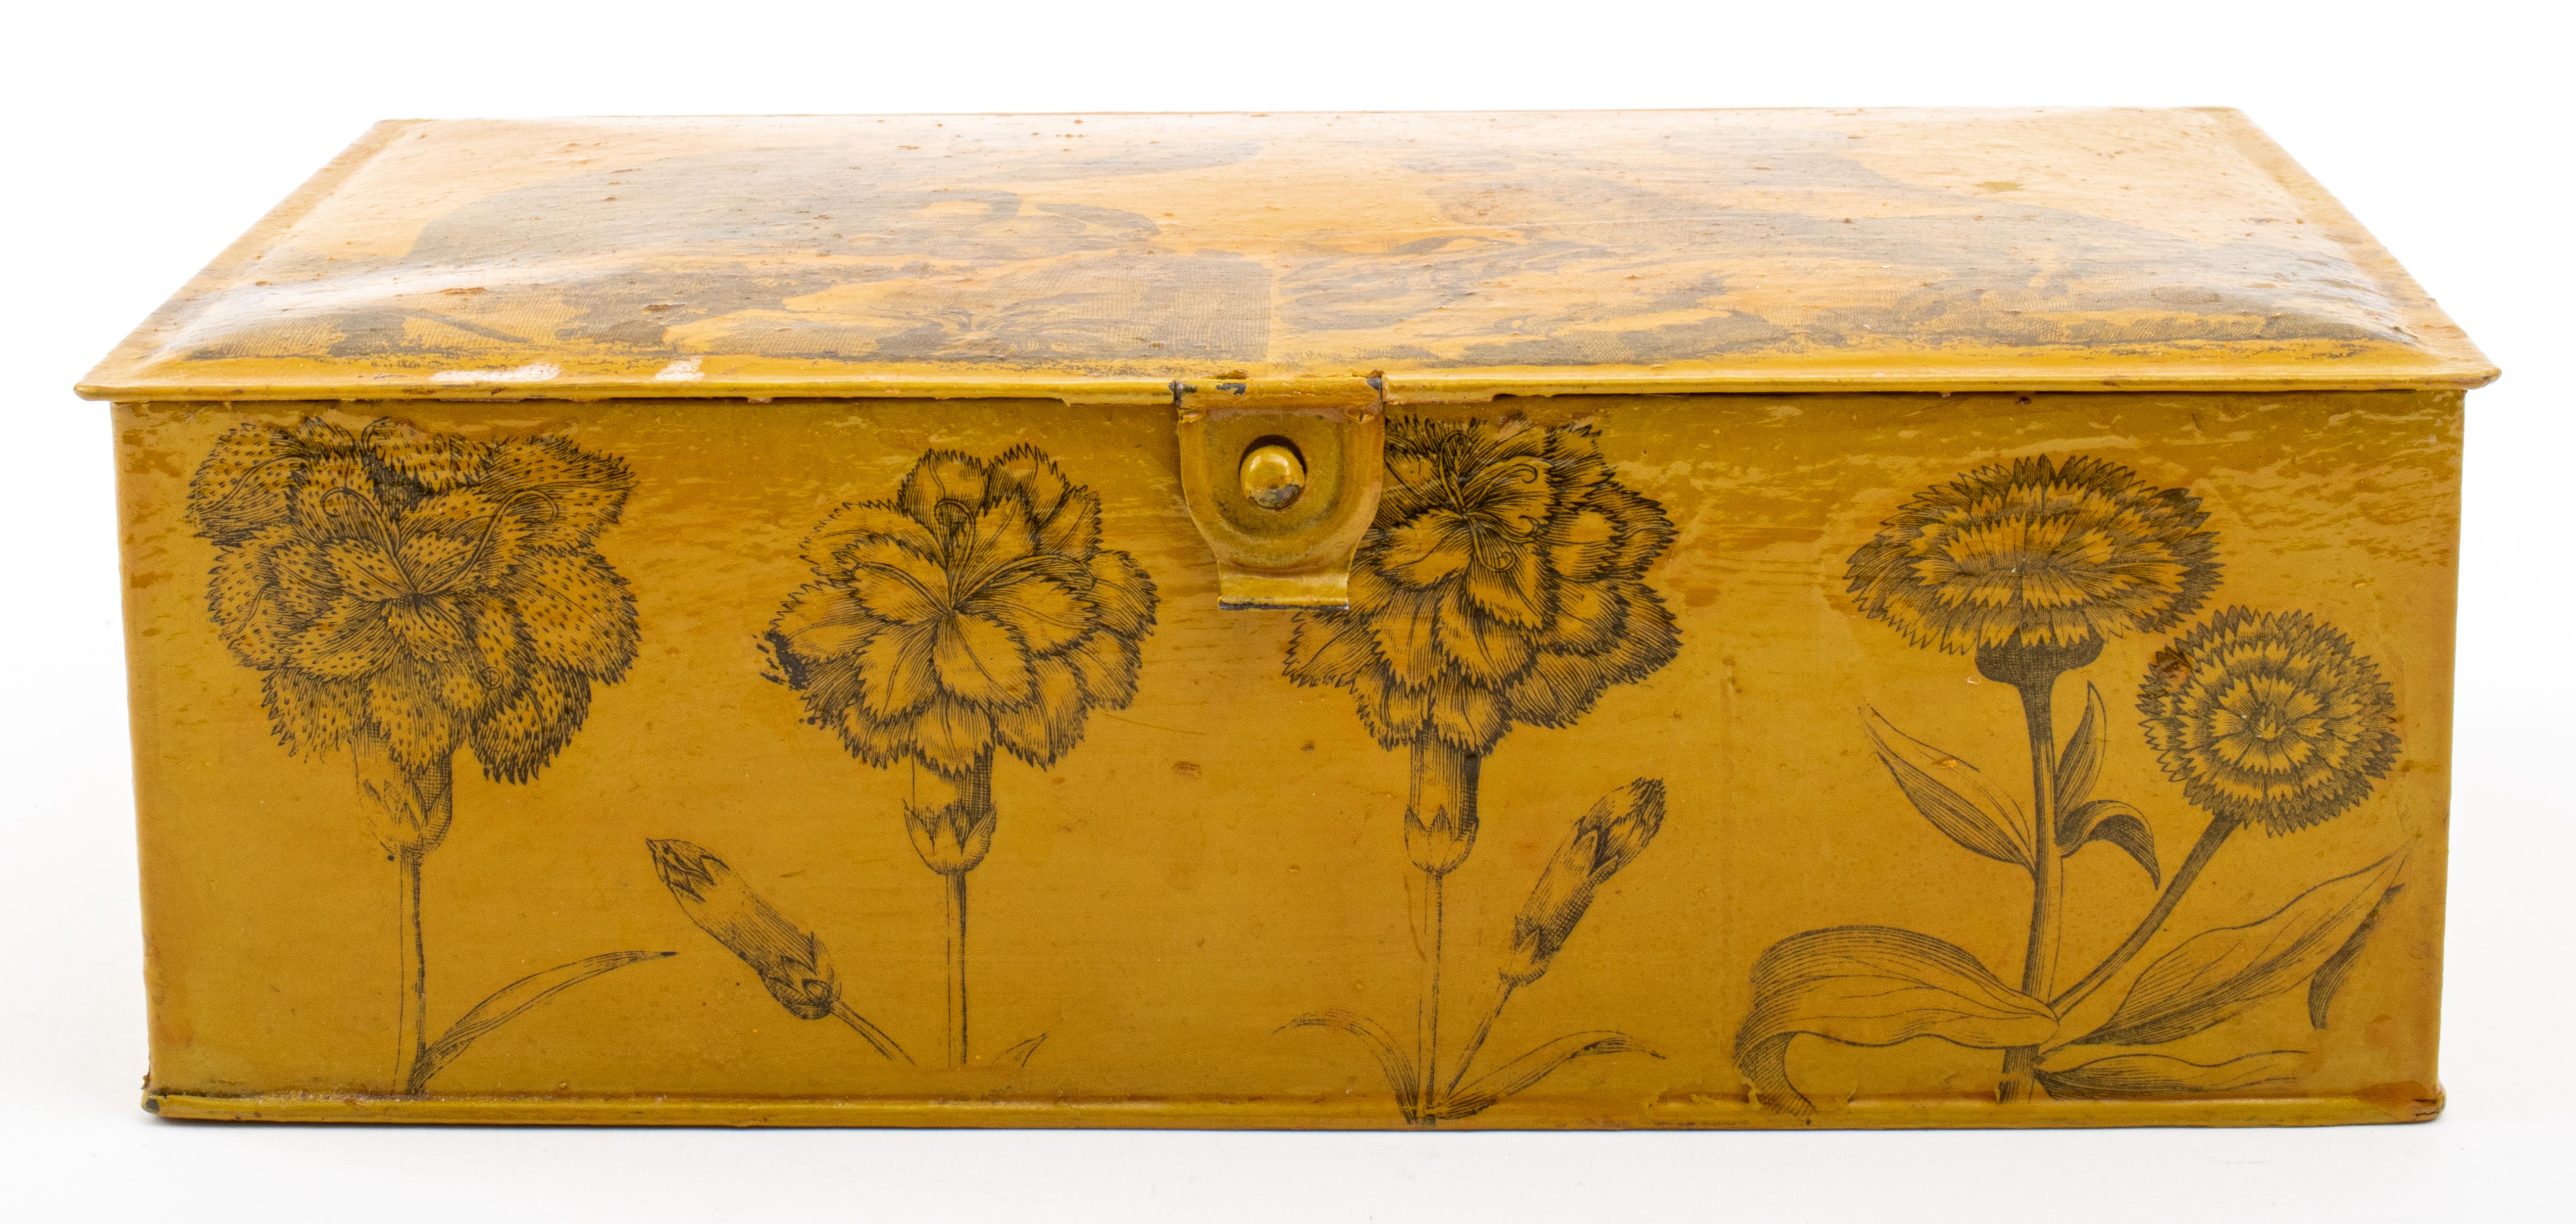 Decoupage-decorated painted casket, rectangular, the top with images of monkeys, the sides with pinks and carnations, applied over a mustard-painted ground, the interior lid decorated with a winter scene dated 1858, the rest of the interior lined in